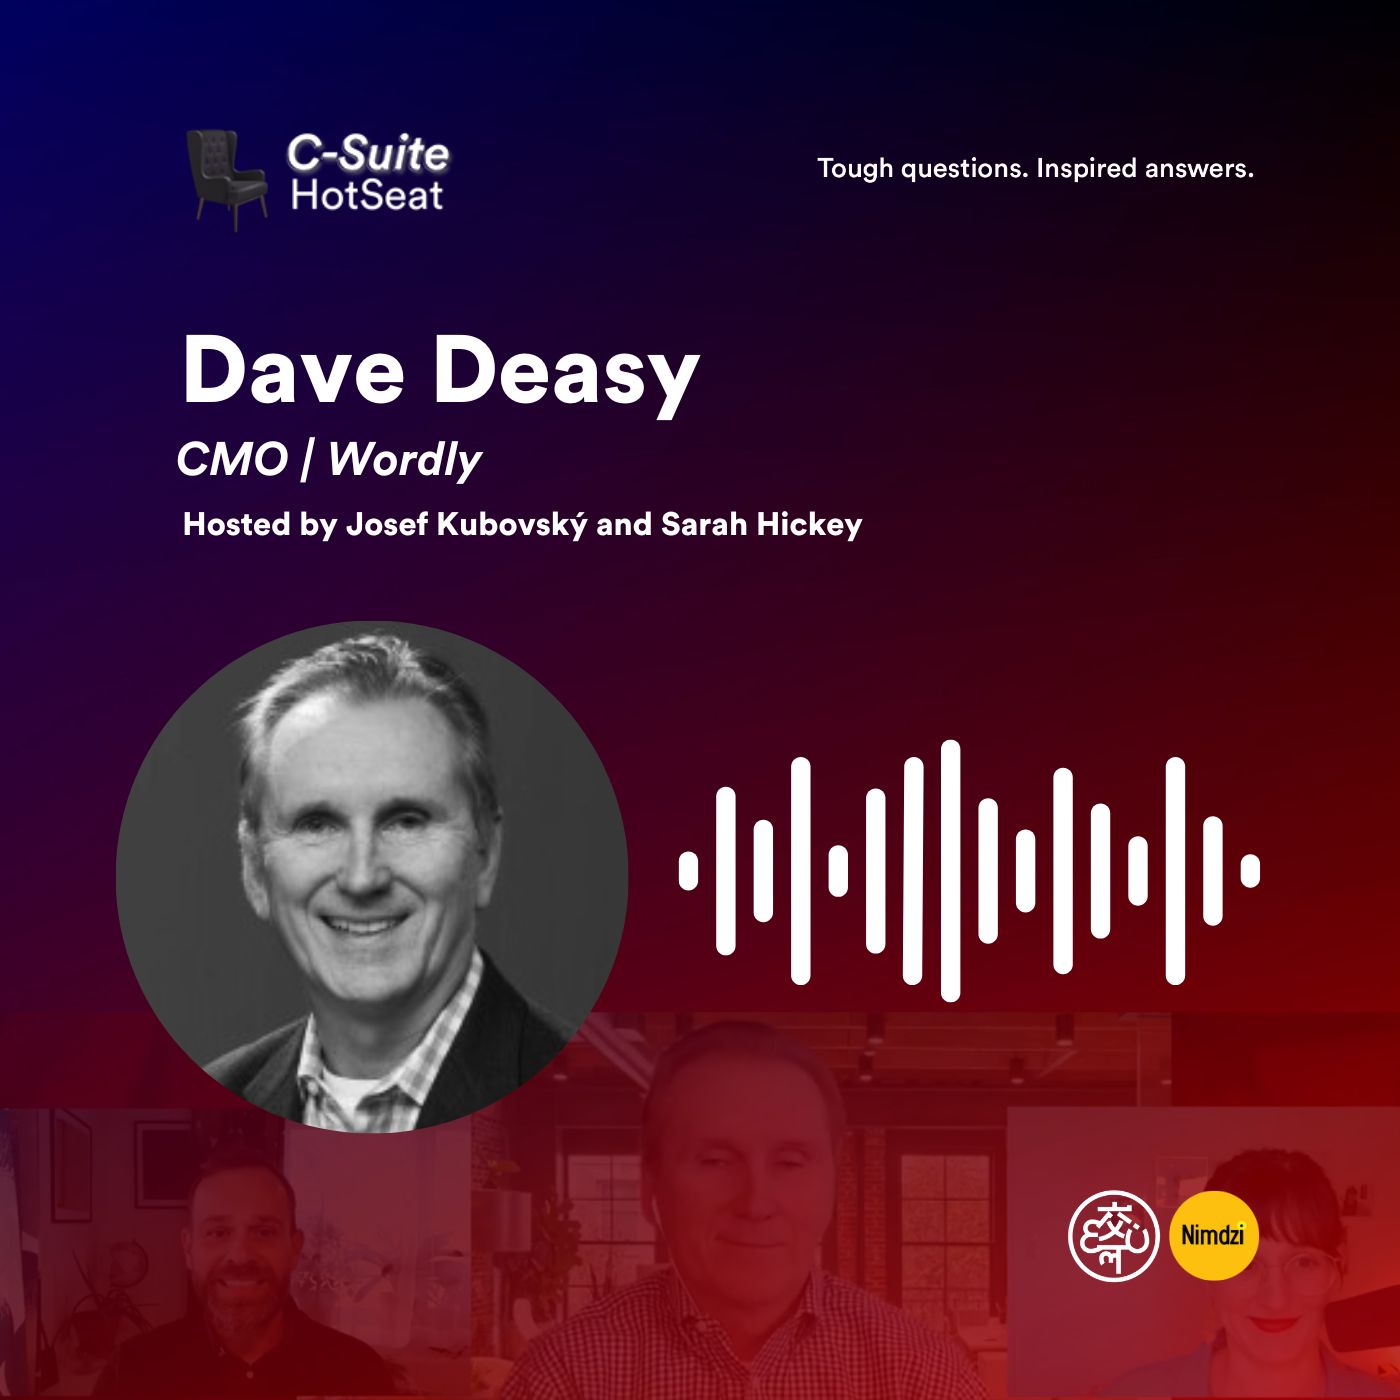 Setting Goals and Expectations With Dave Deasy, CMO of Wordly | C-Suite HotSeat E47